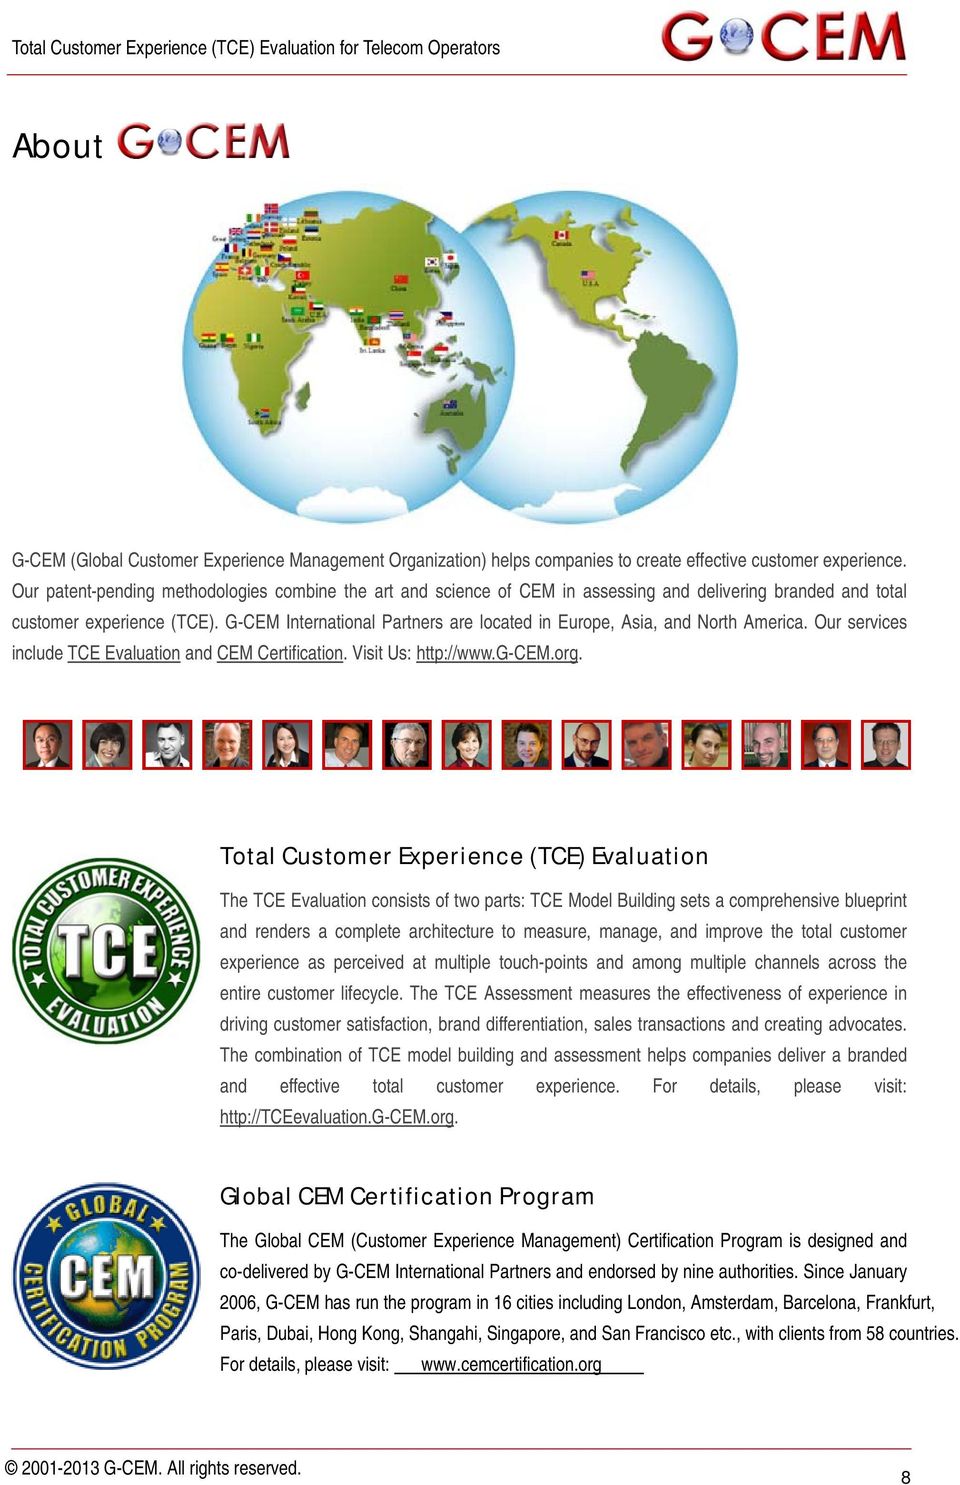 G-CEM International Partners are located in Europe, Asia, and North America. Our services include TCE Evaluation and CEM Certification. Visit Us: http://www.g-cem.org.